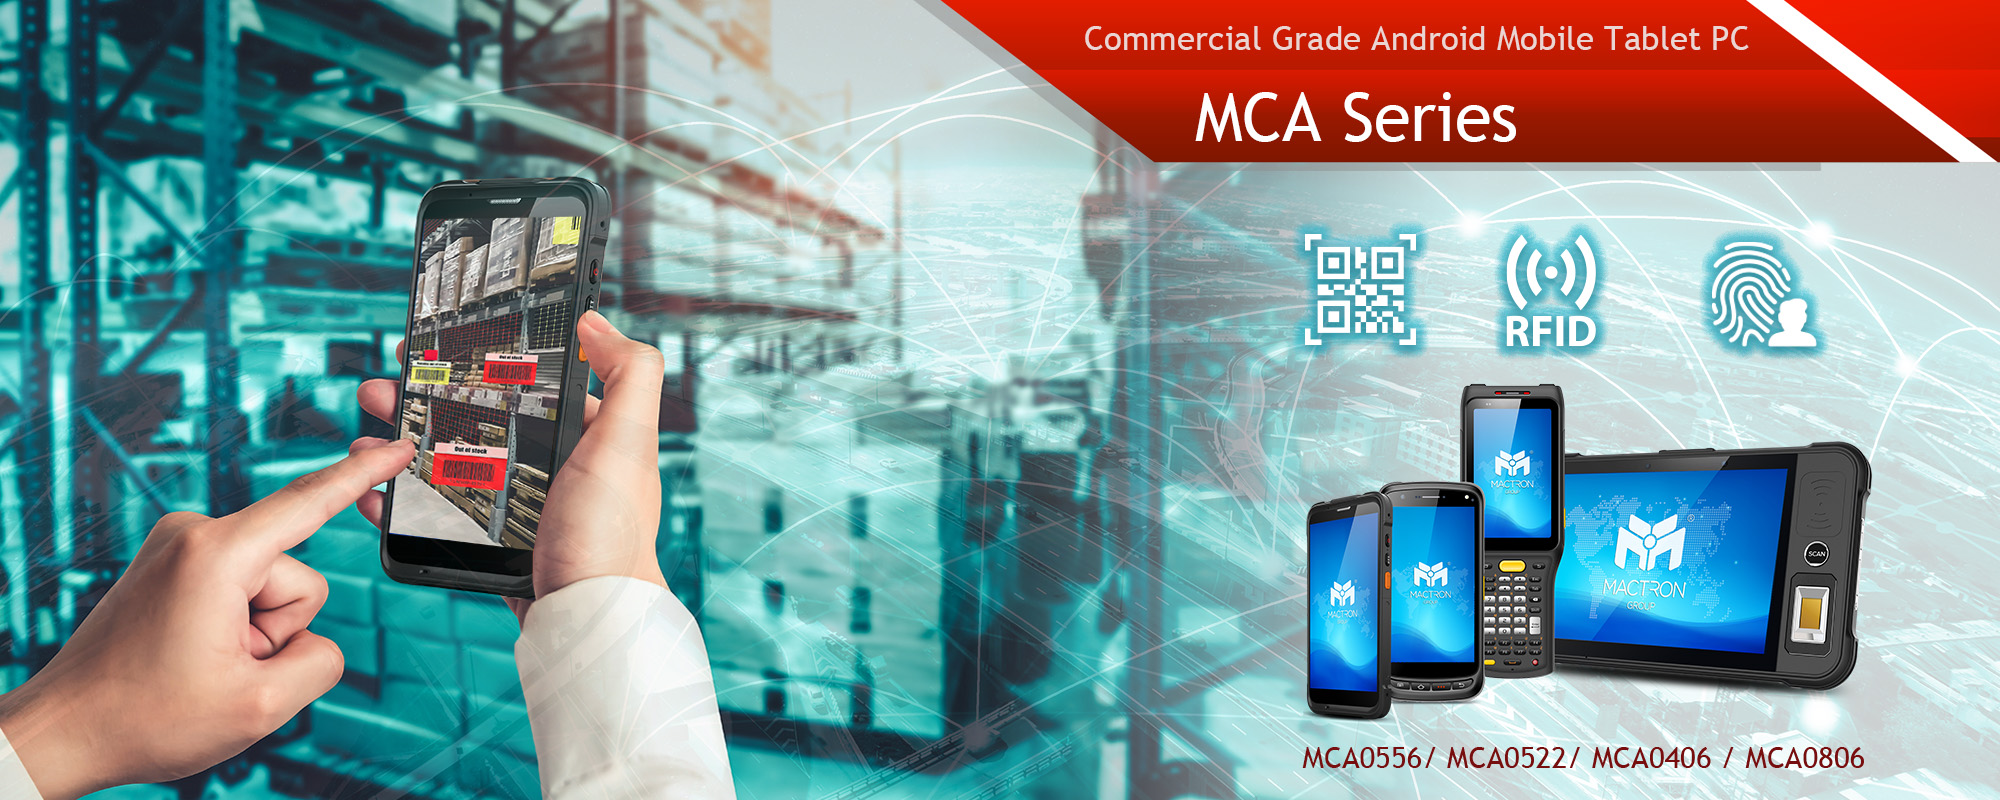 MCA Series - Commercial Grade Android Mobile Tablet PC